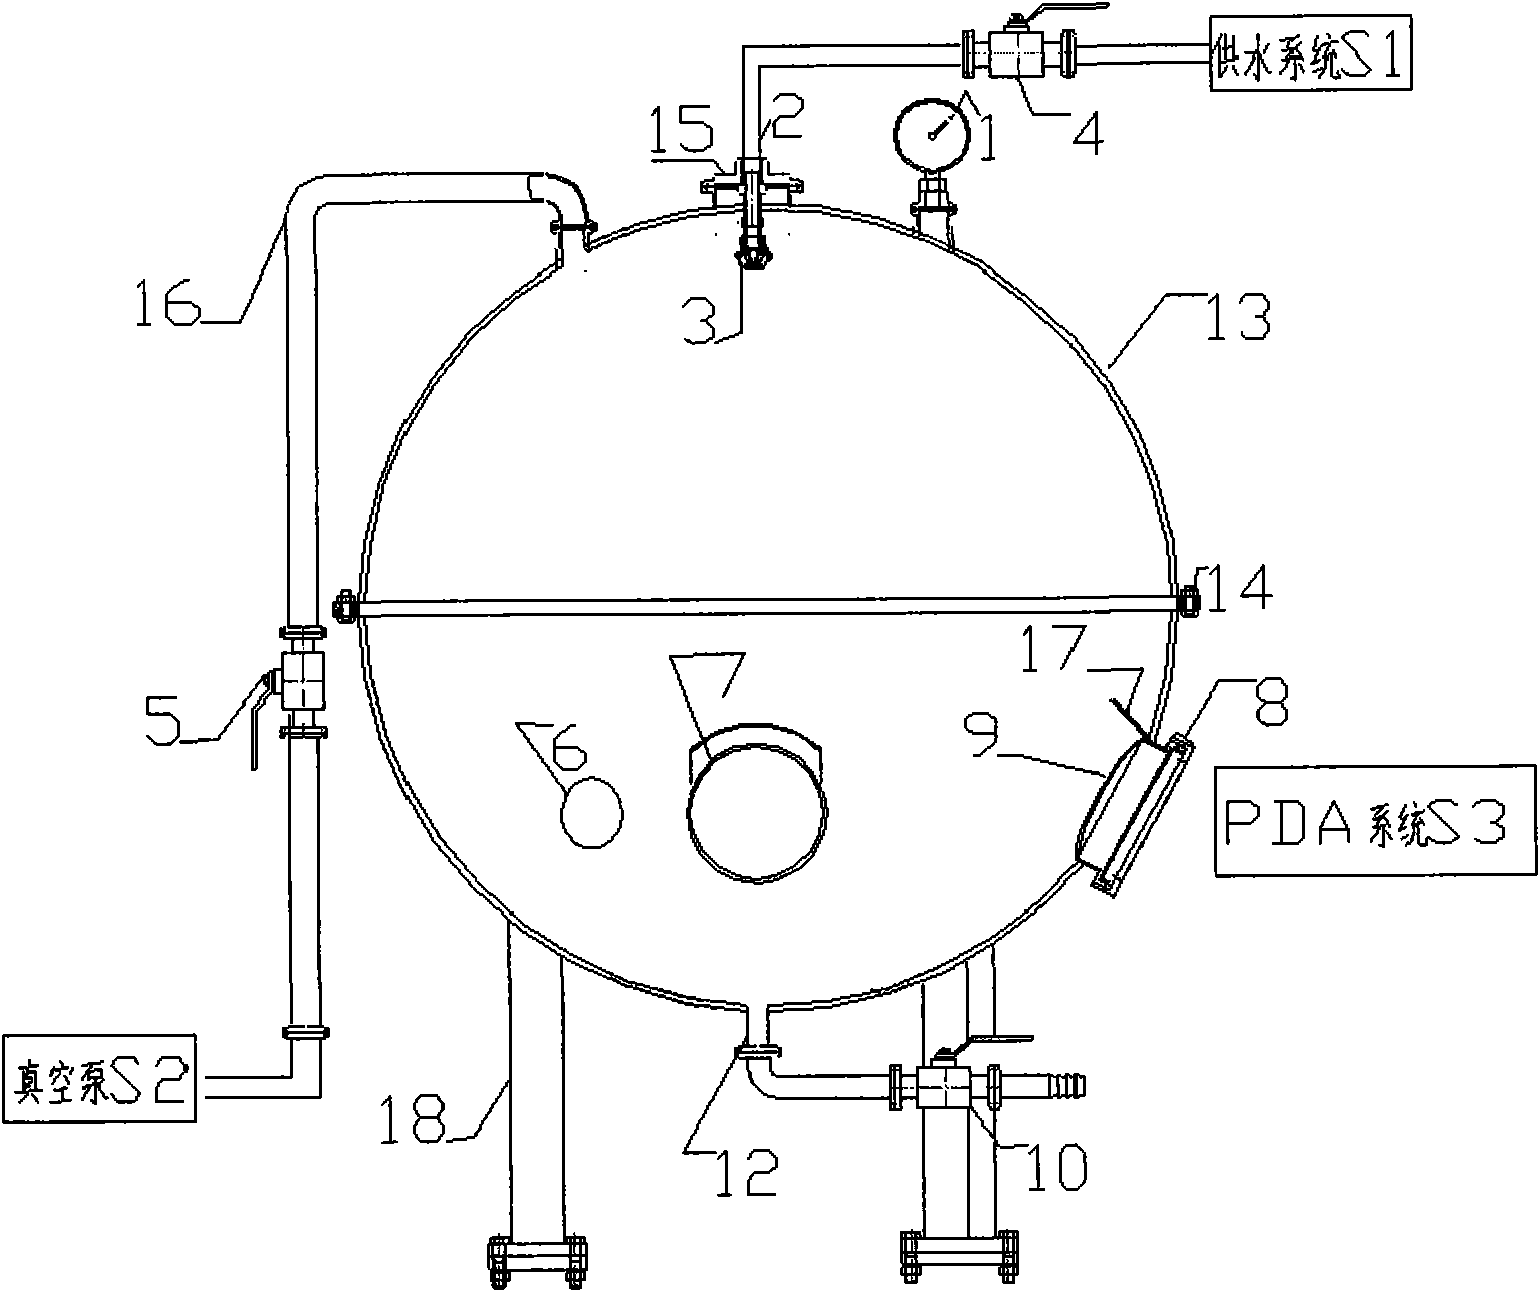 Experimental apparatus for measuring spray characteristics under low air pressure condition